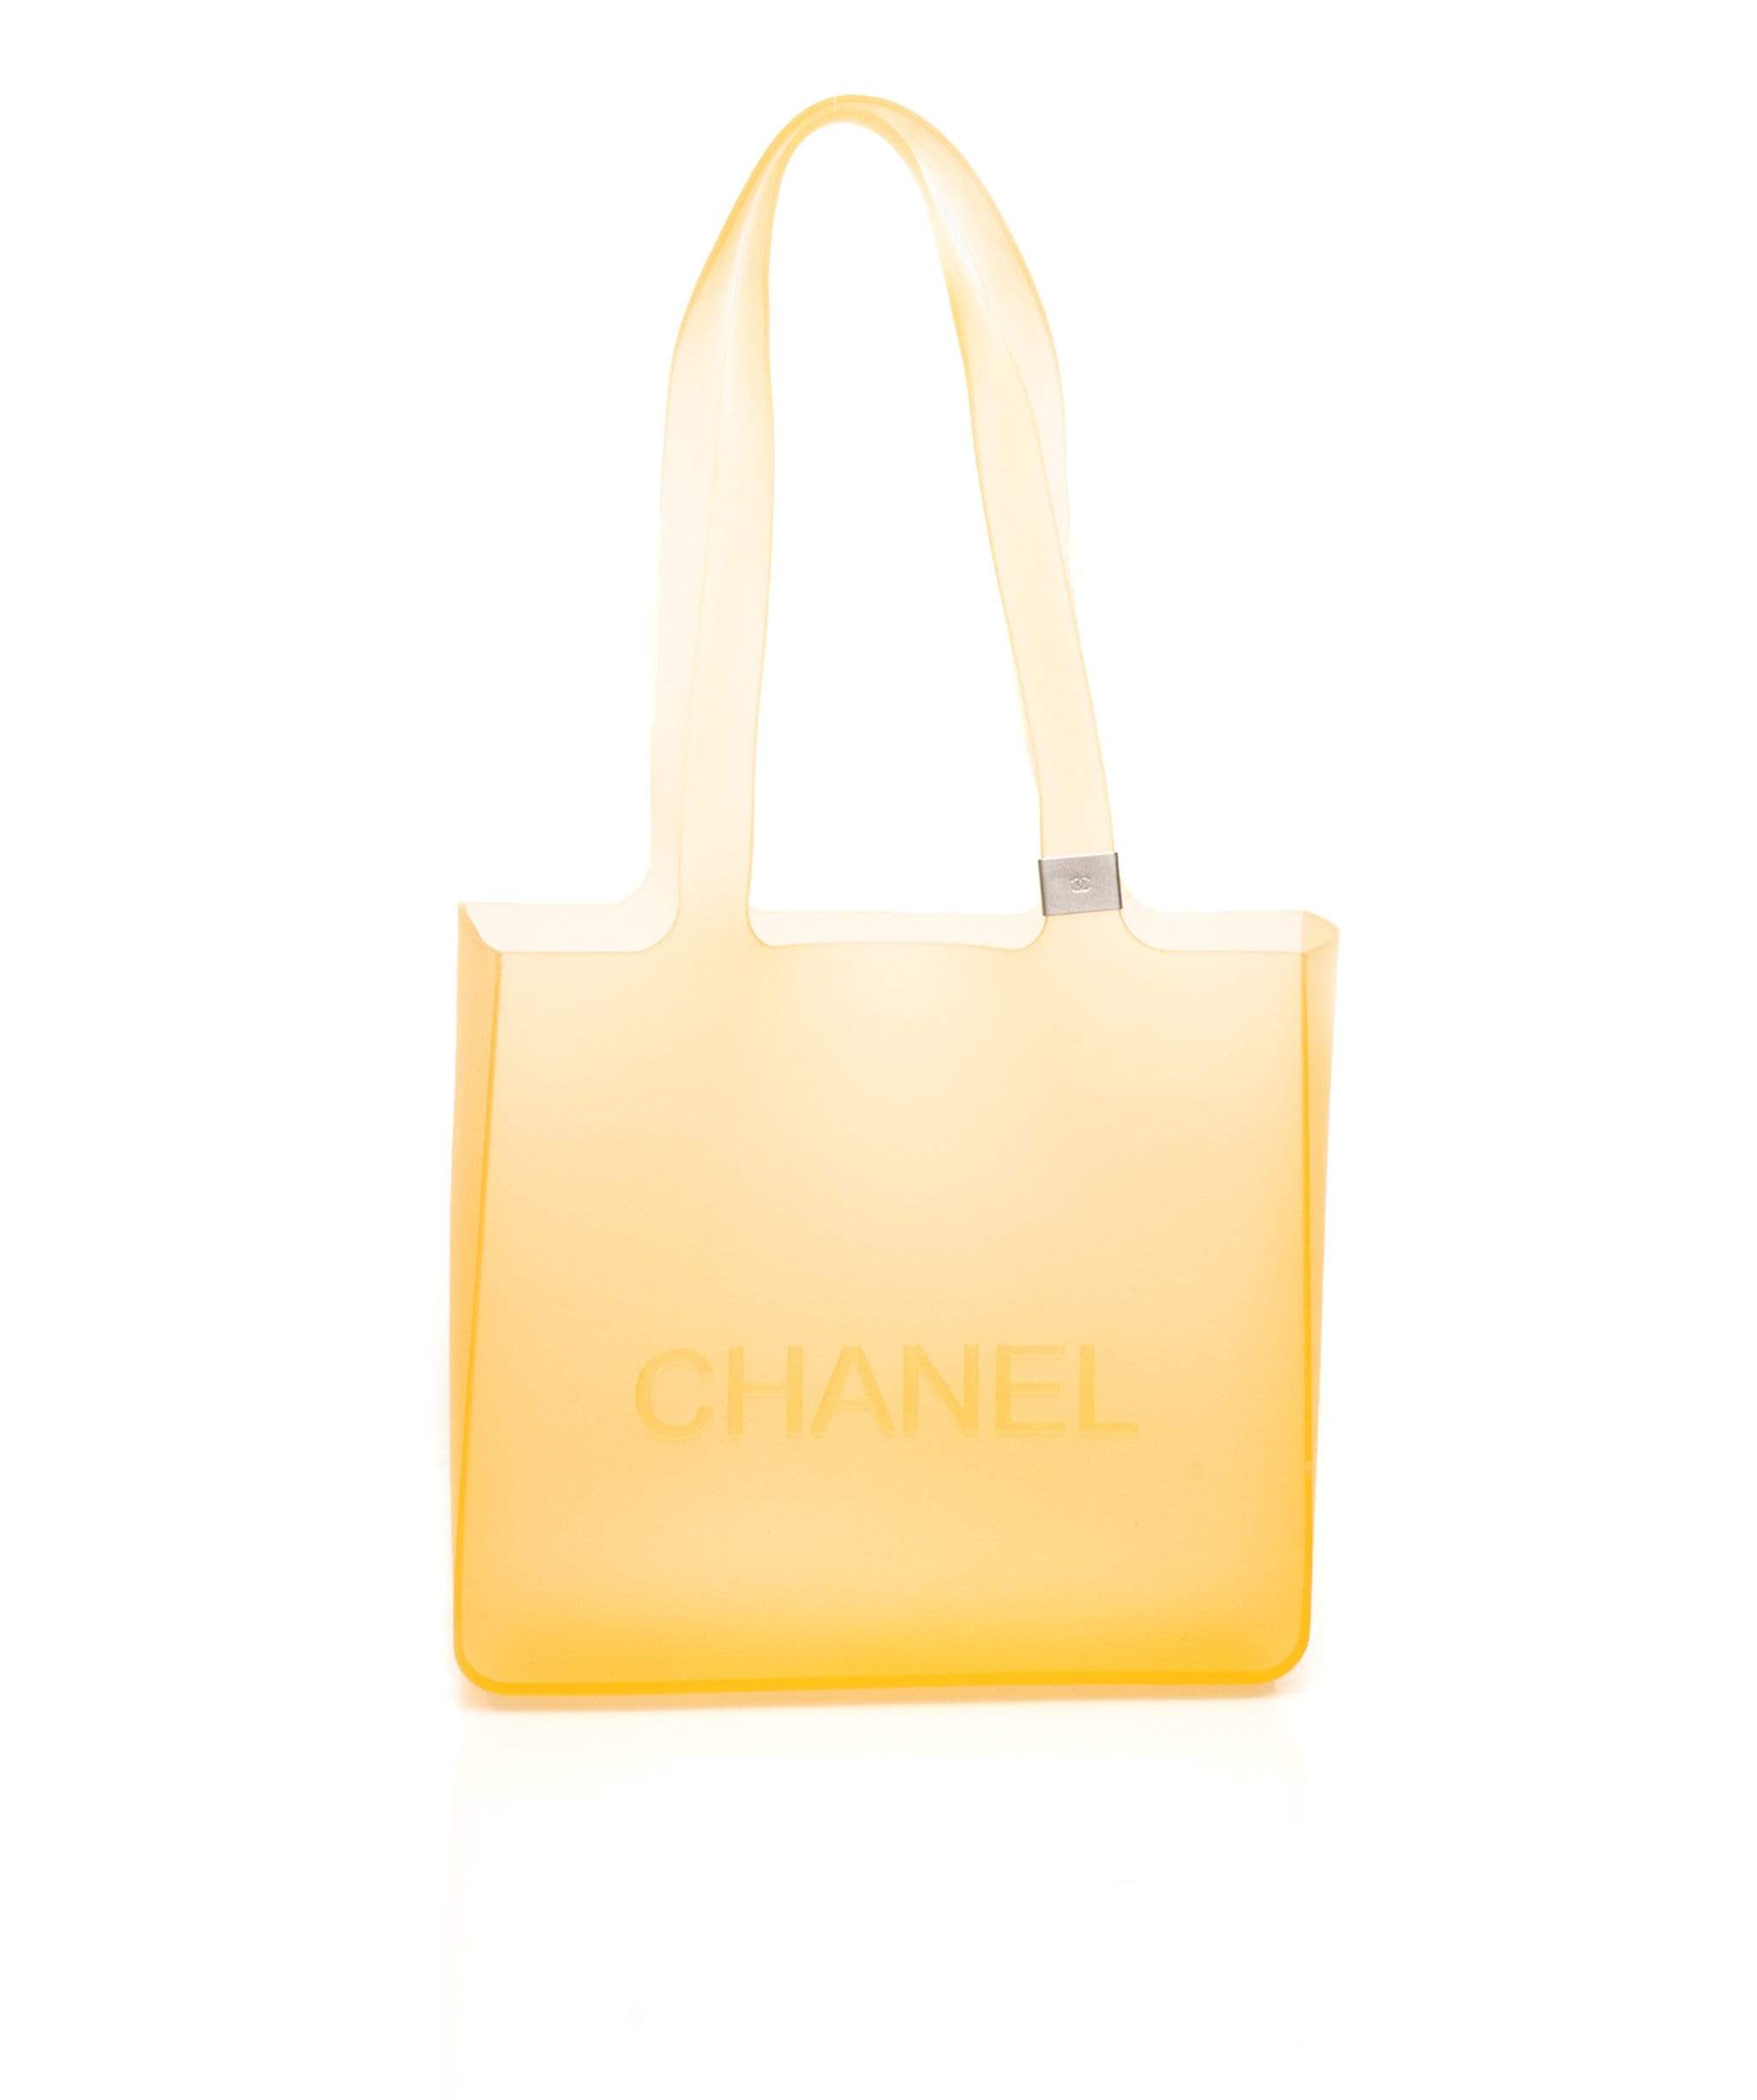 Chanel Vintage Small Jelly Bag - AWL1669